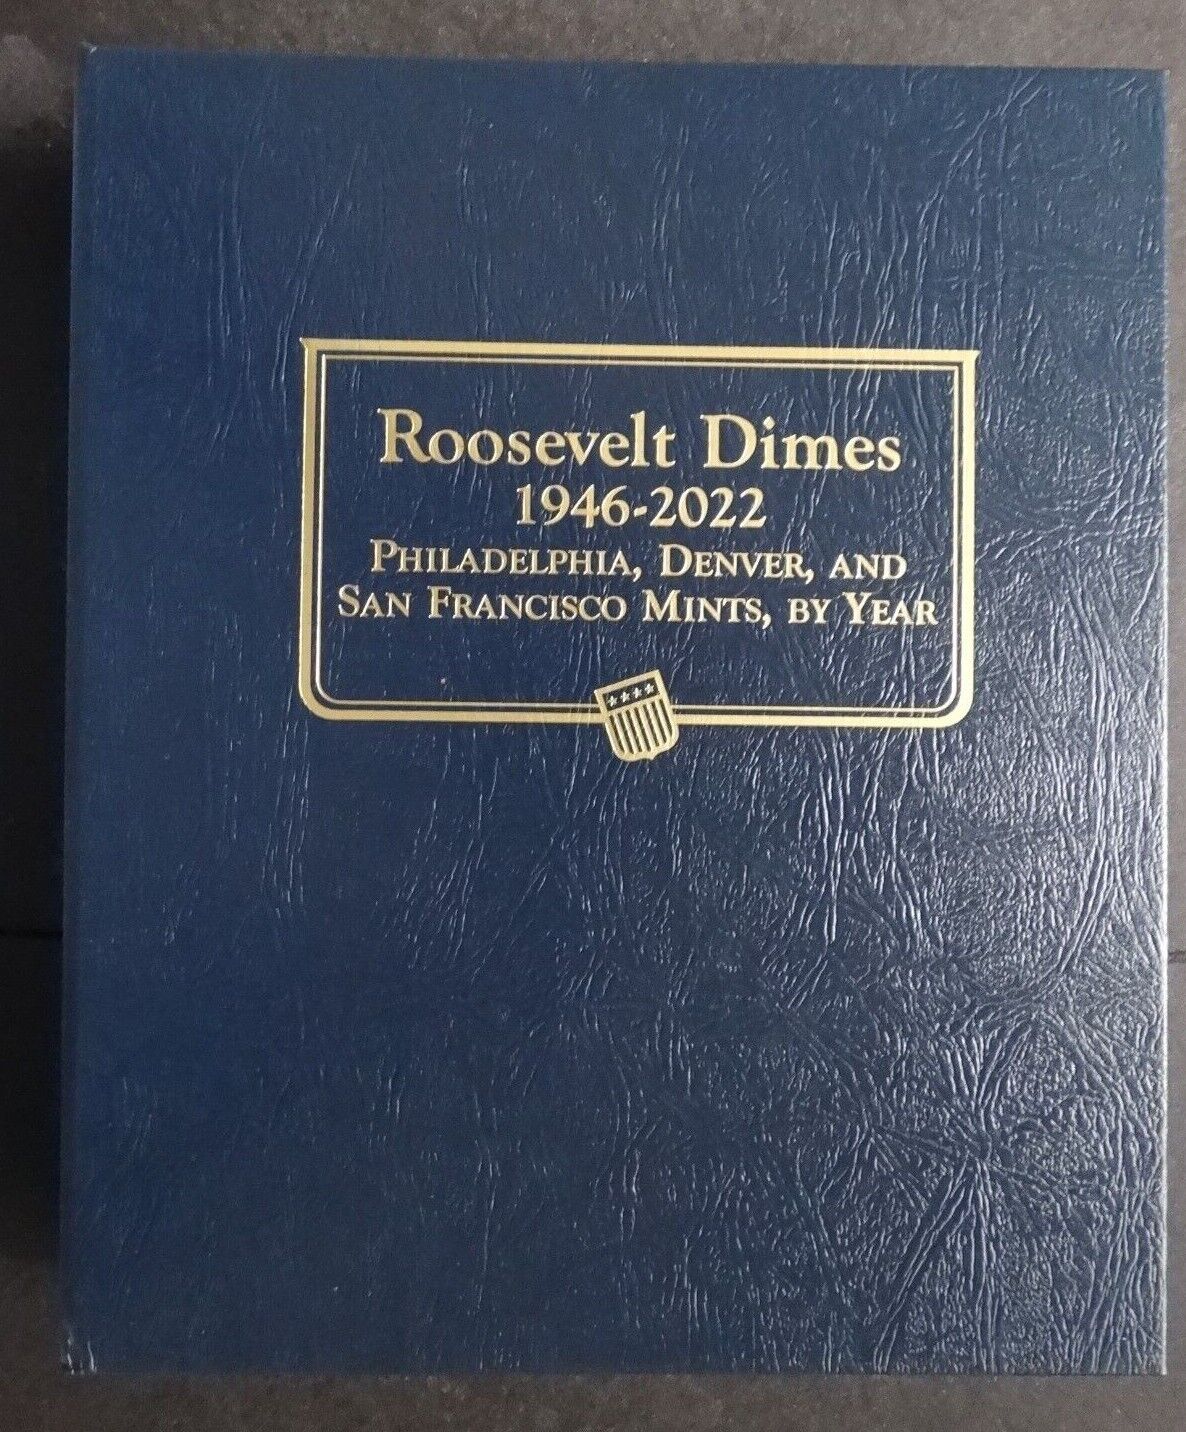 Whitman Roosevelt Dimes Dime Coin Album Book Number 3 1946-2022 #3394